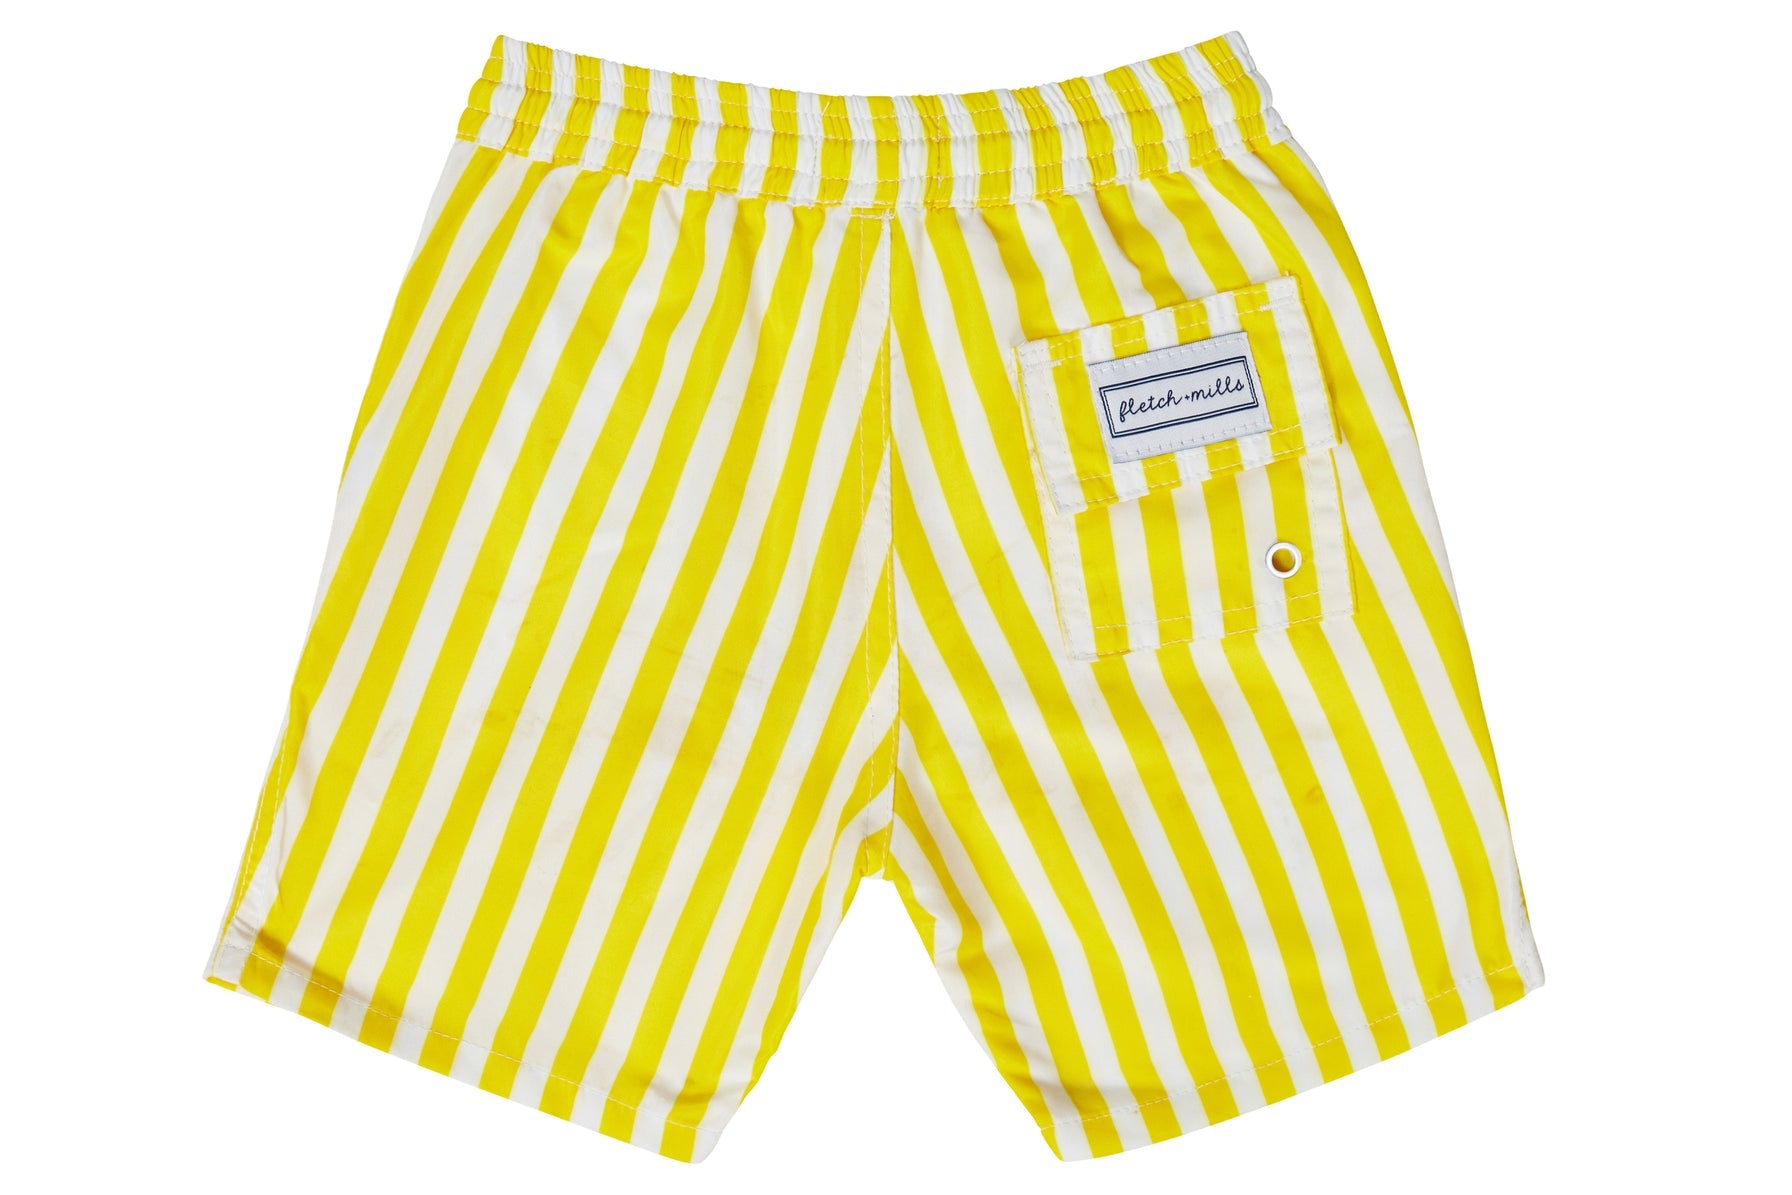 Outlet - Mens Yellow and White Stripe